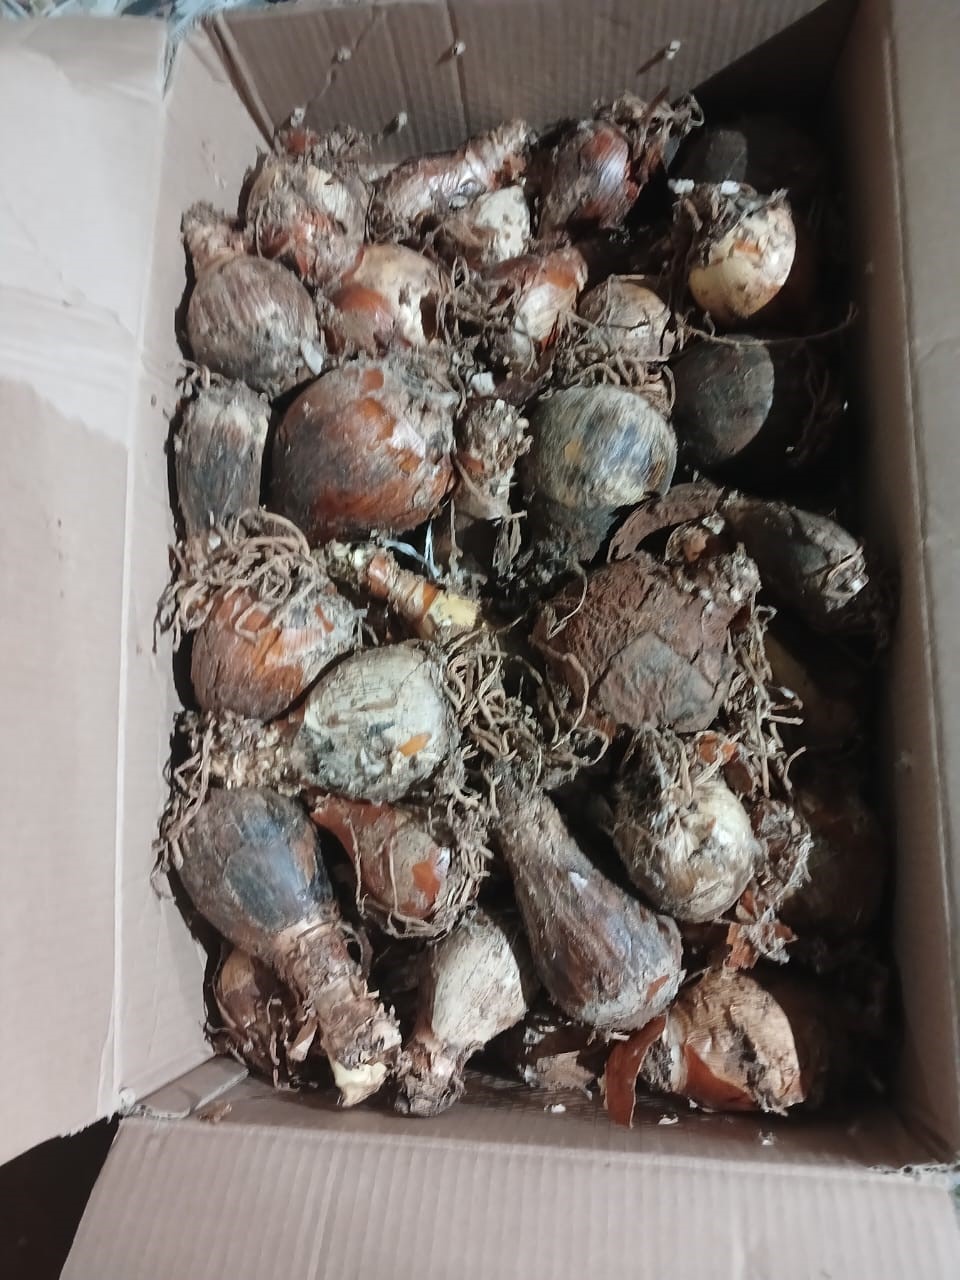 Flying Squad confiscate abalone and indigenous plants